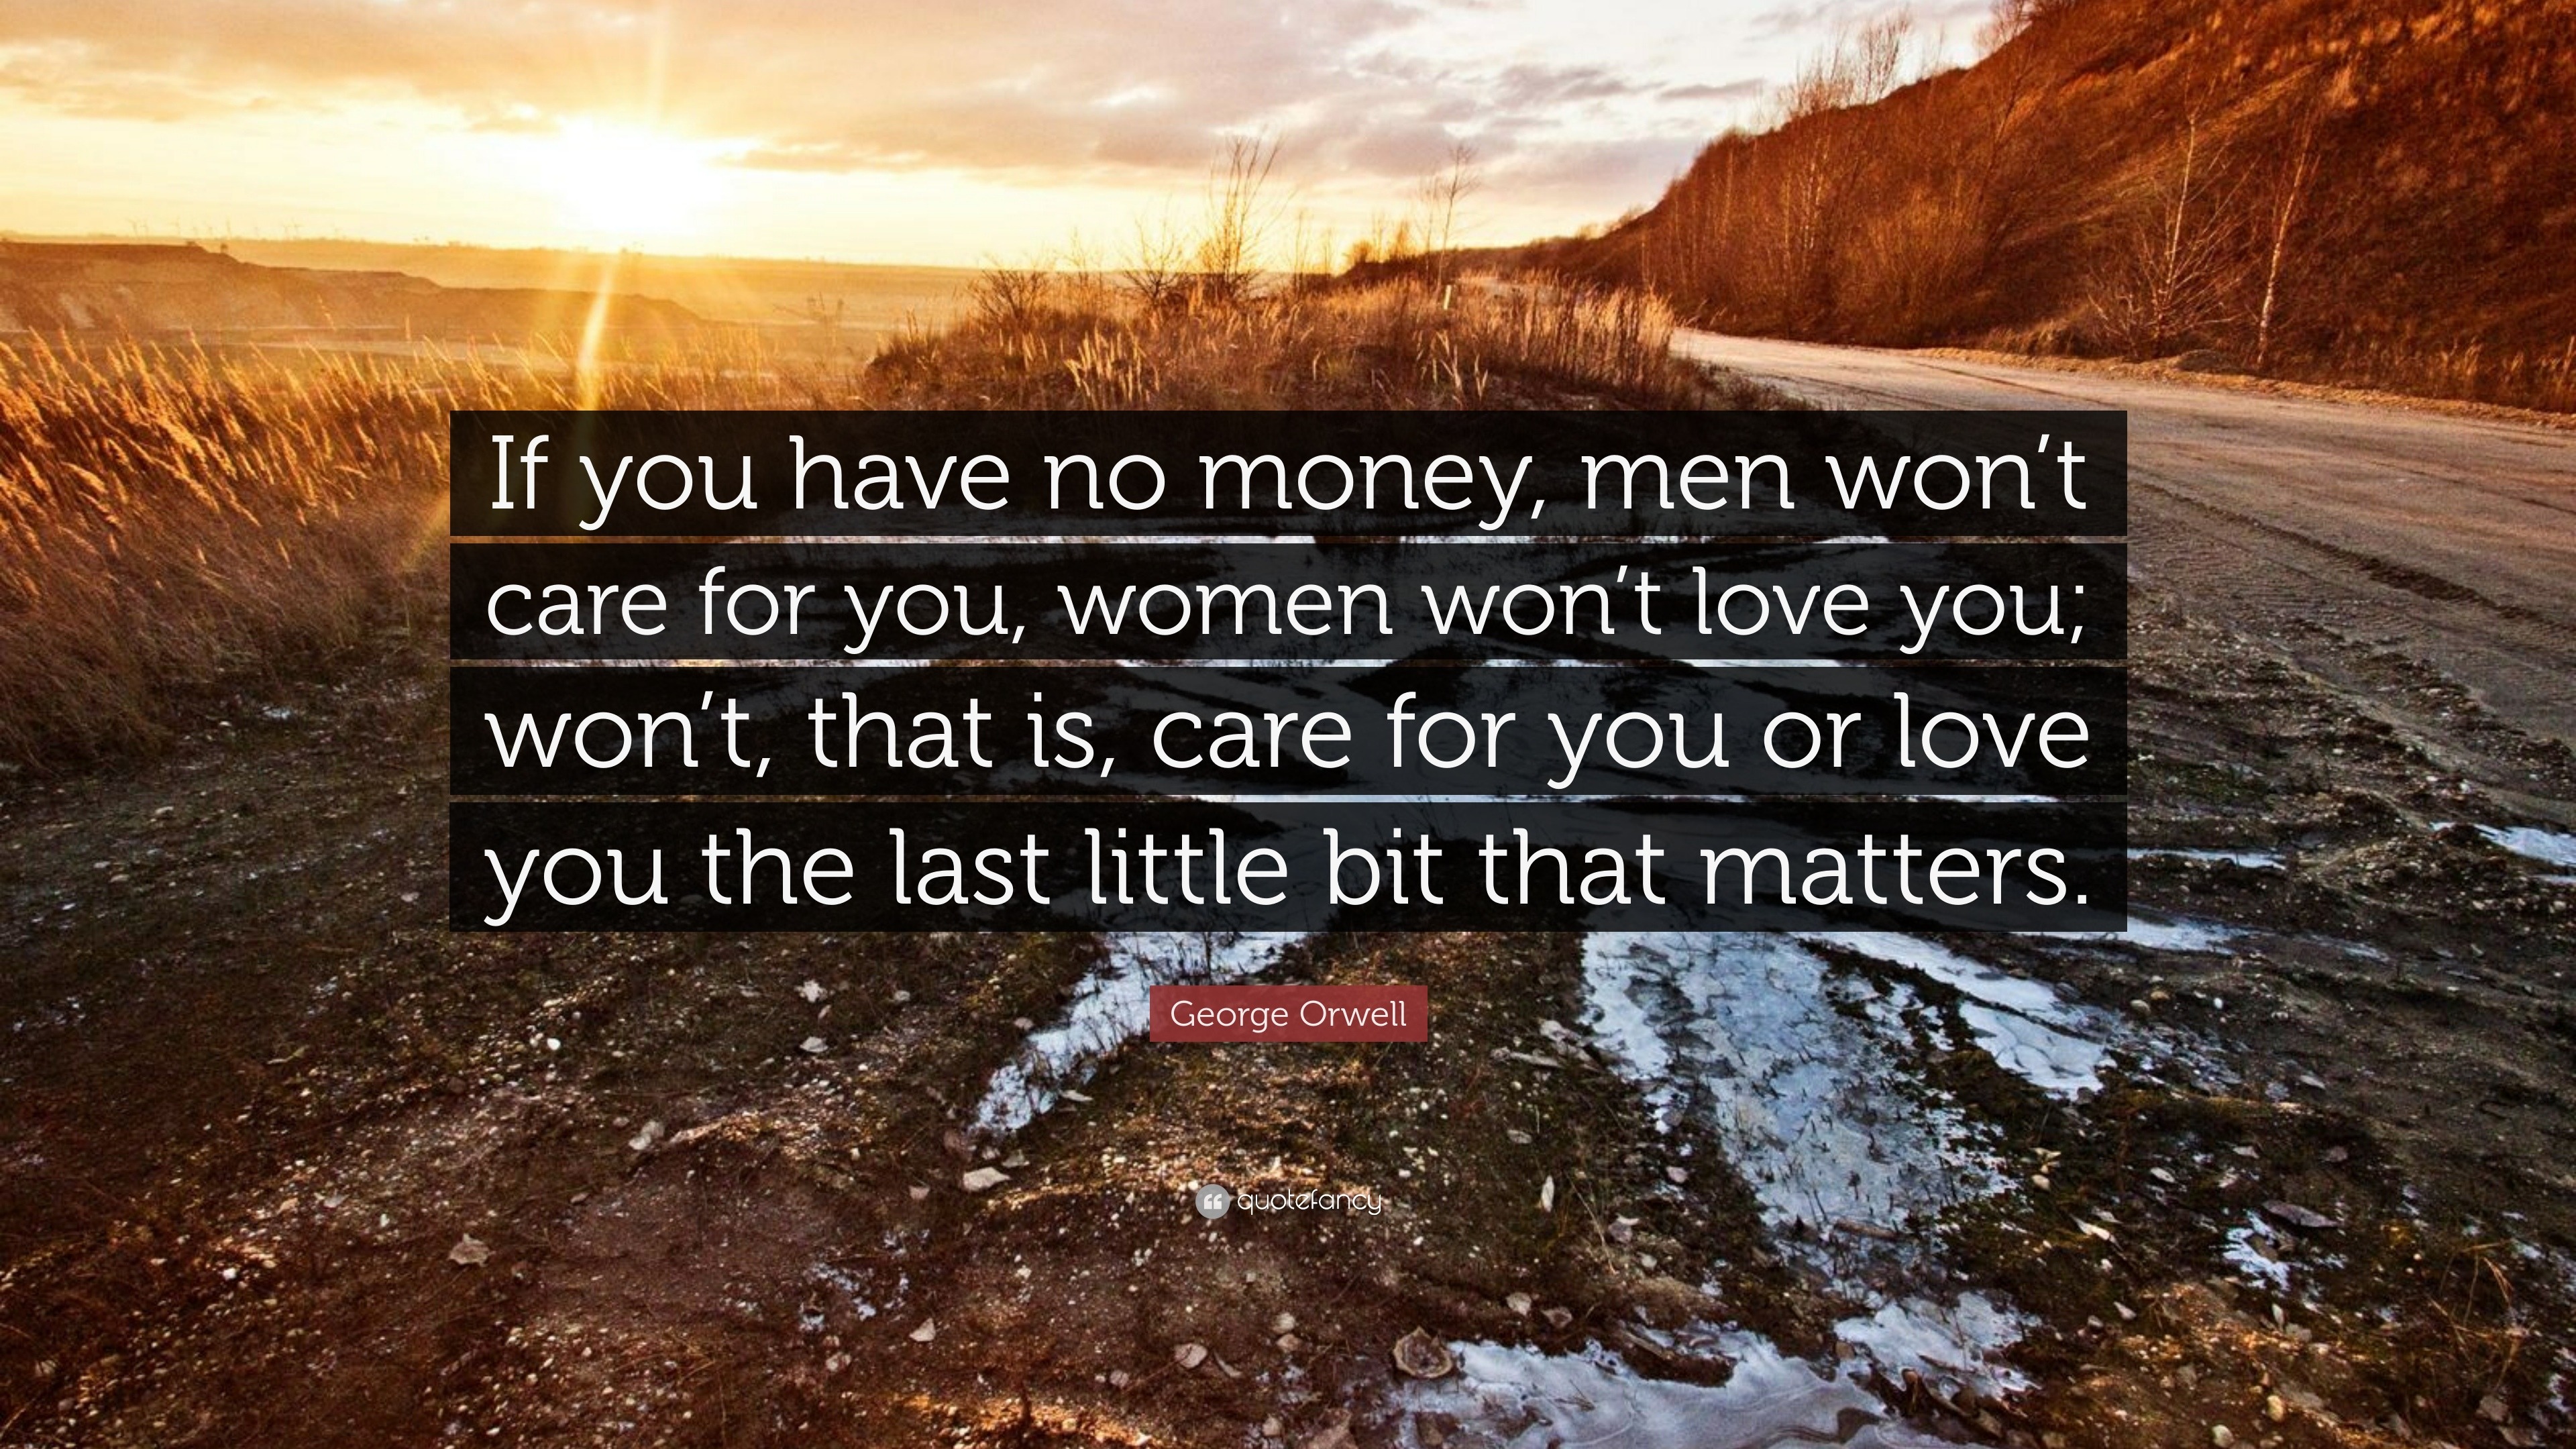 George Orwell Quote: “If you have no money, men won’t care for you ...